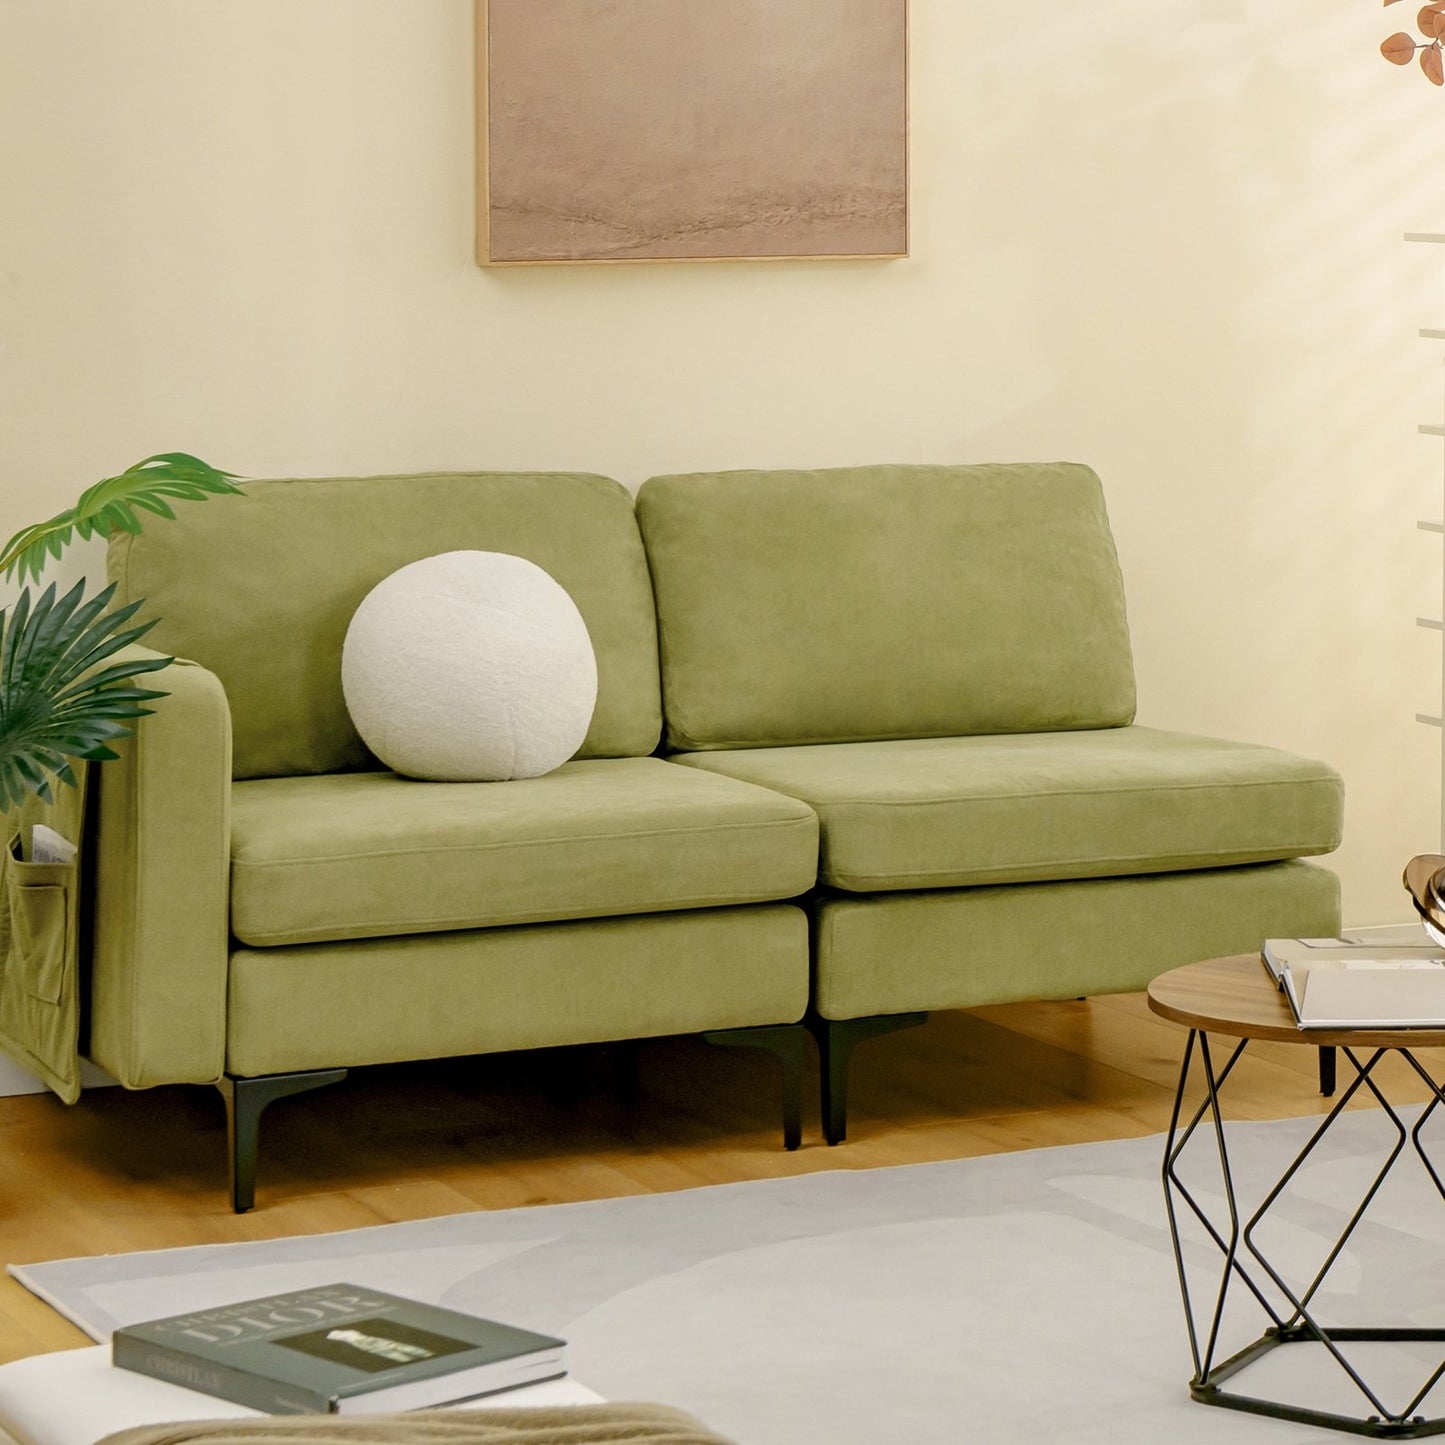 Modular L-shaped Sectional Sofa with Reversible Ottoman and 2 USB Ports, Green